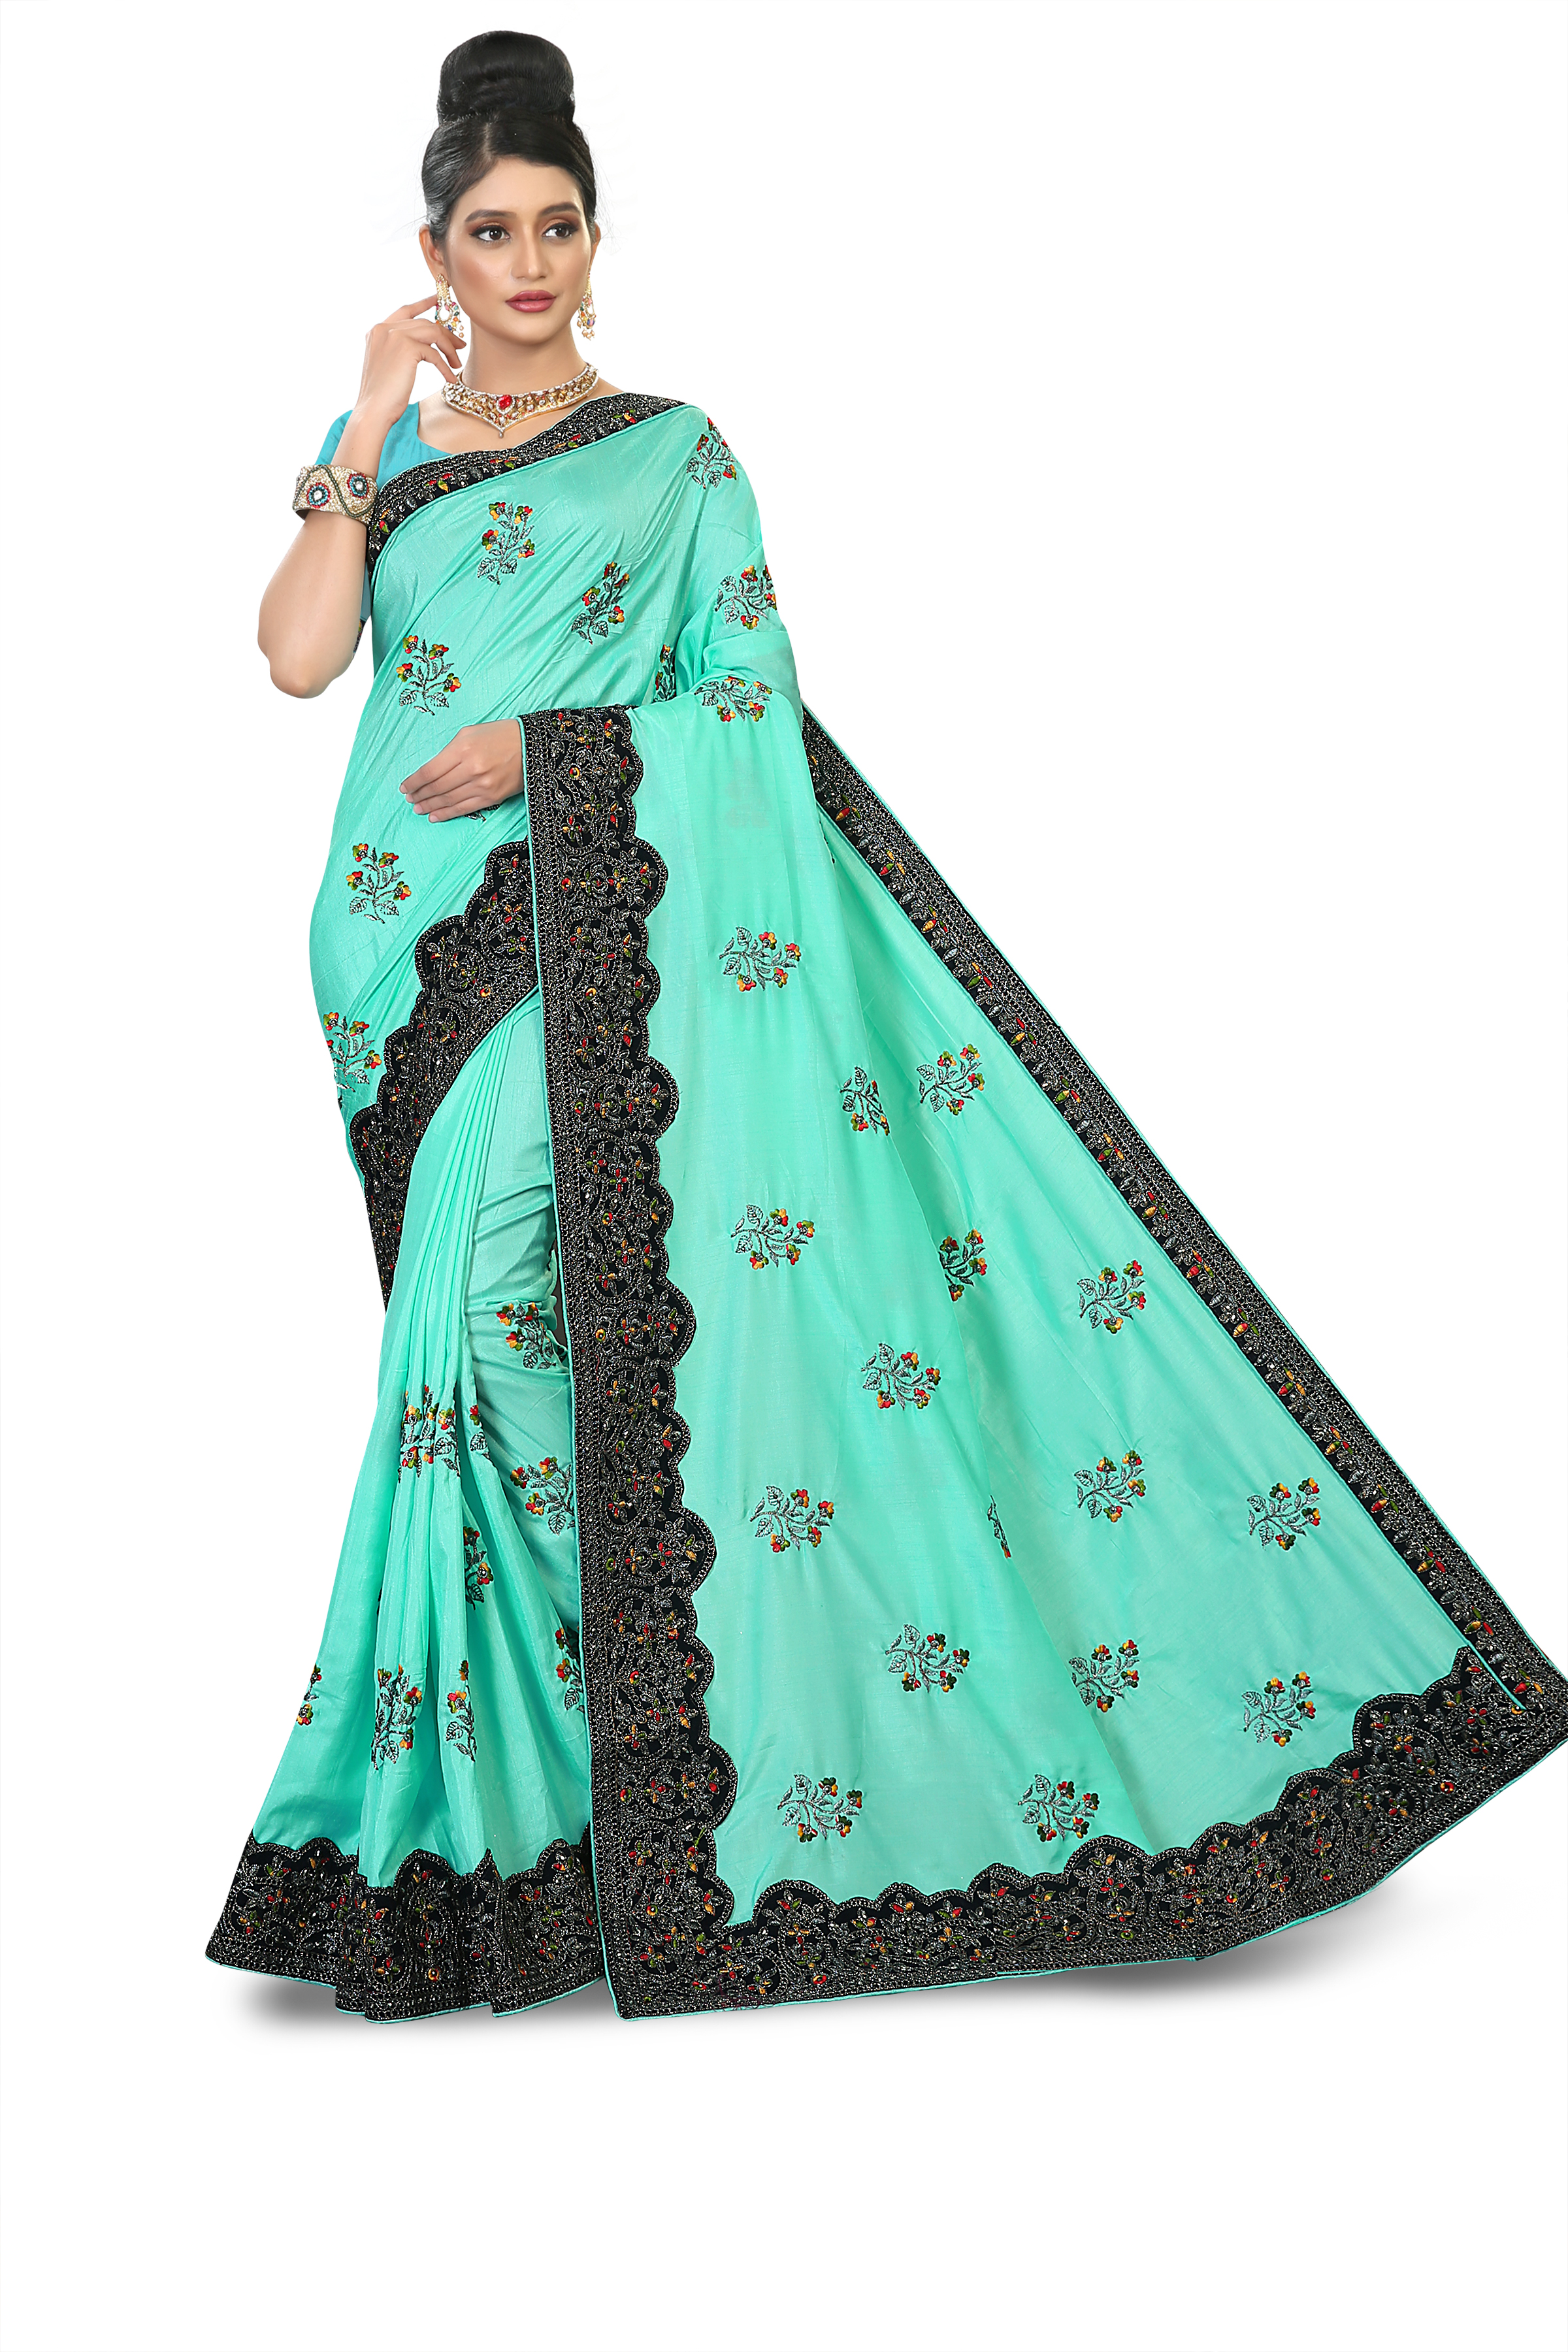 Ranjna Access Occasional Wear Traditional Saree Collection